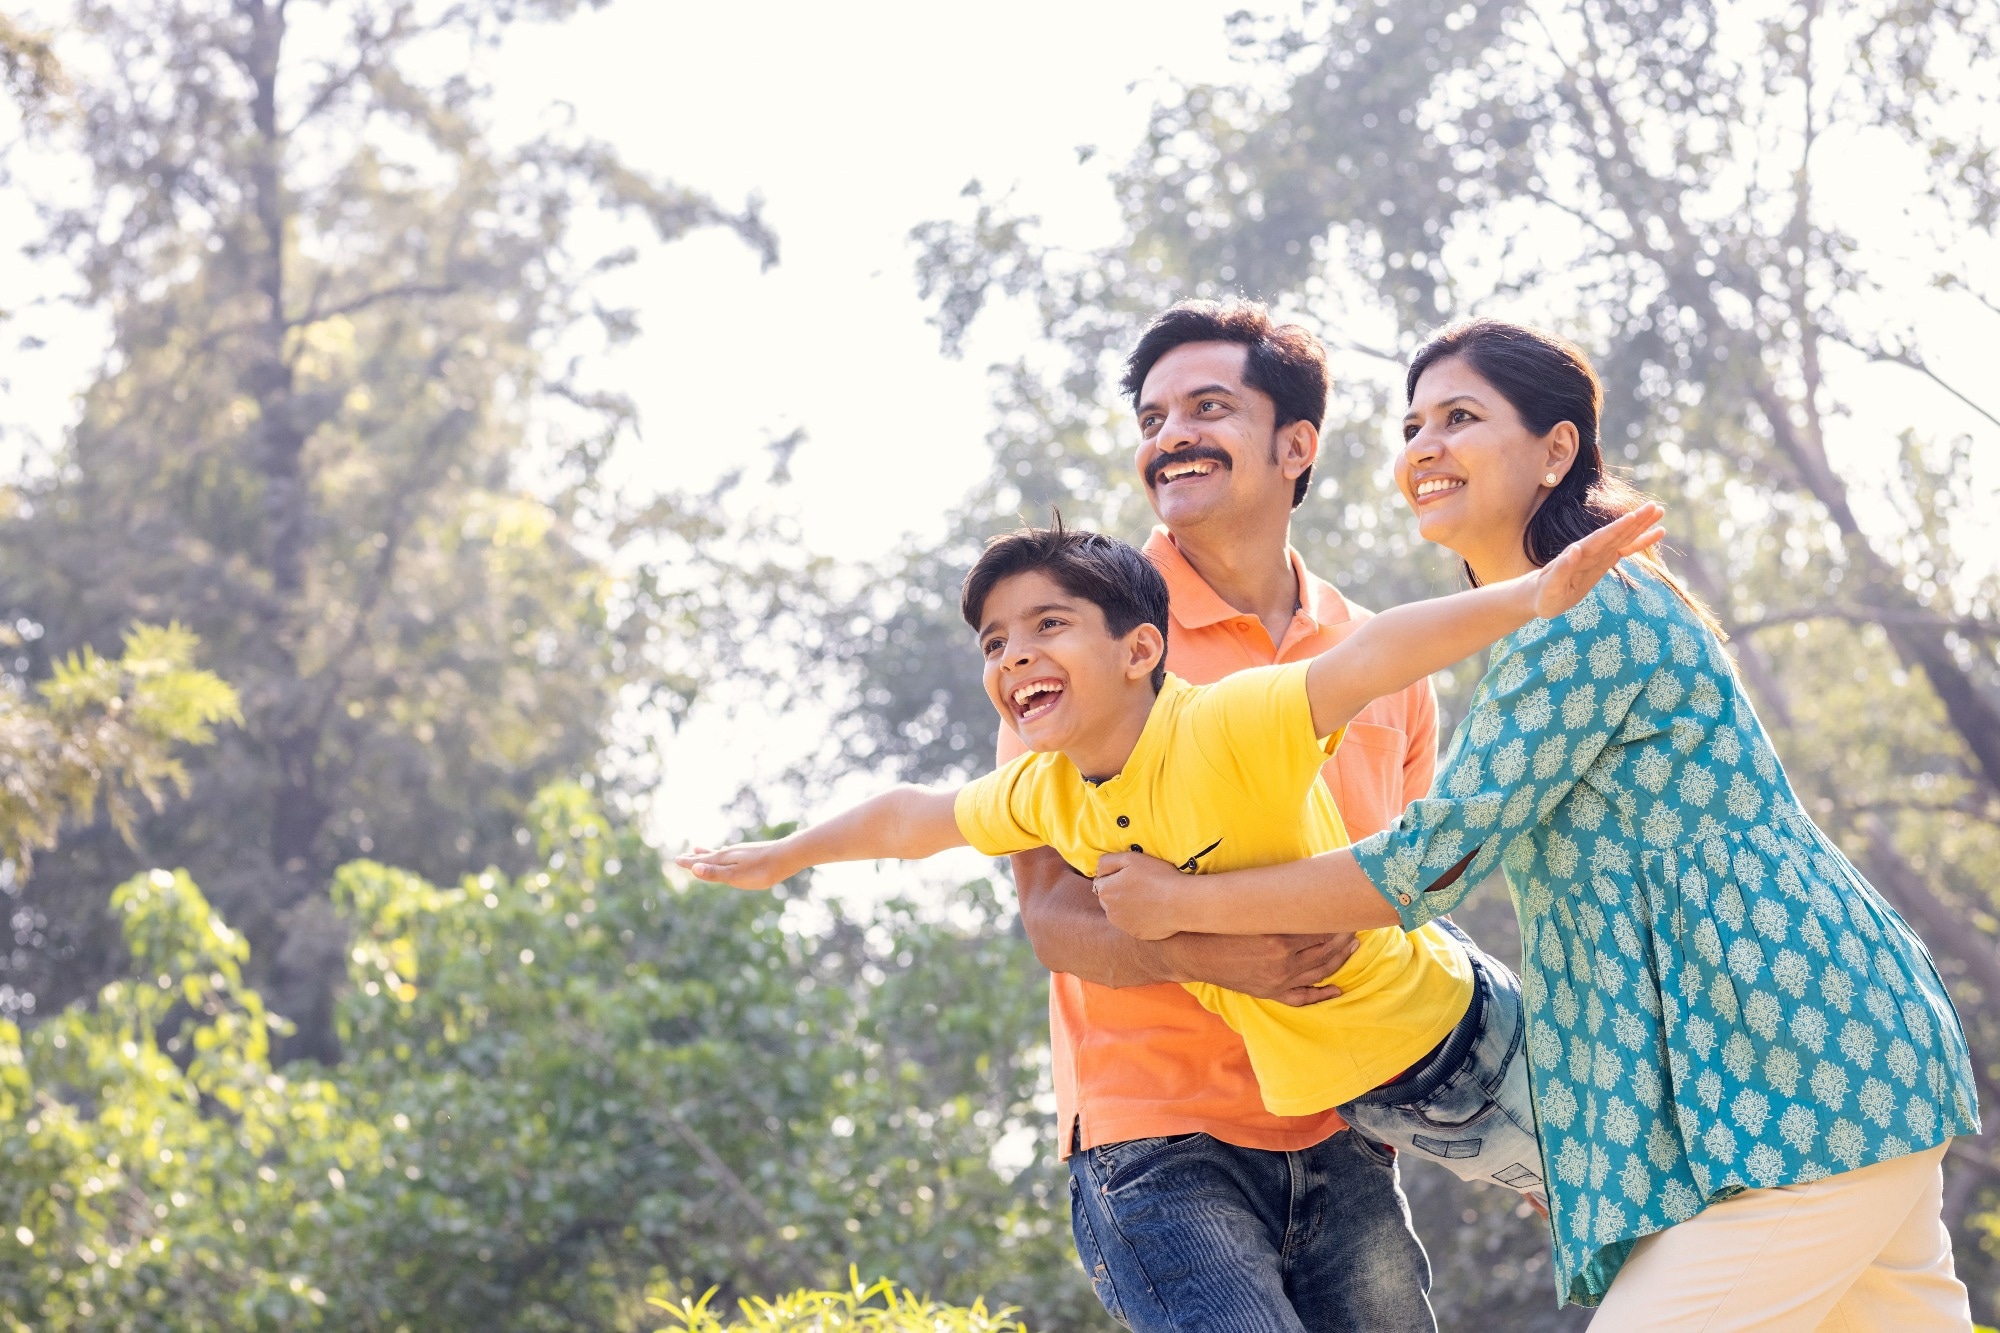 Study: Family ideals in an era of low fertility. Image Credit: IndianFaces / Shutterstock